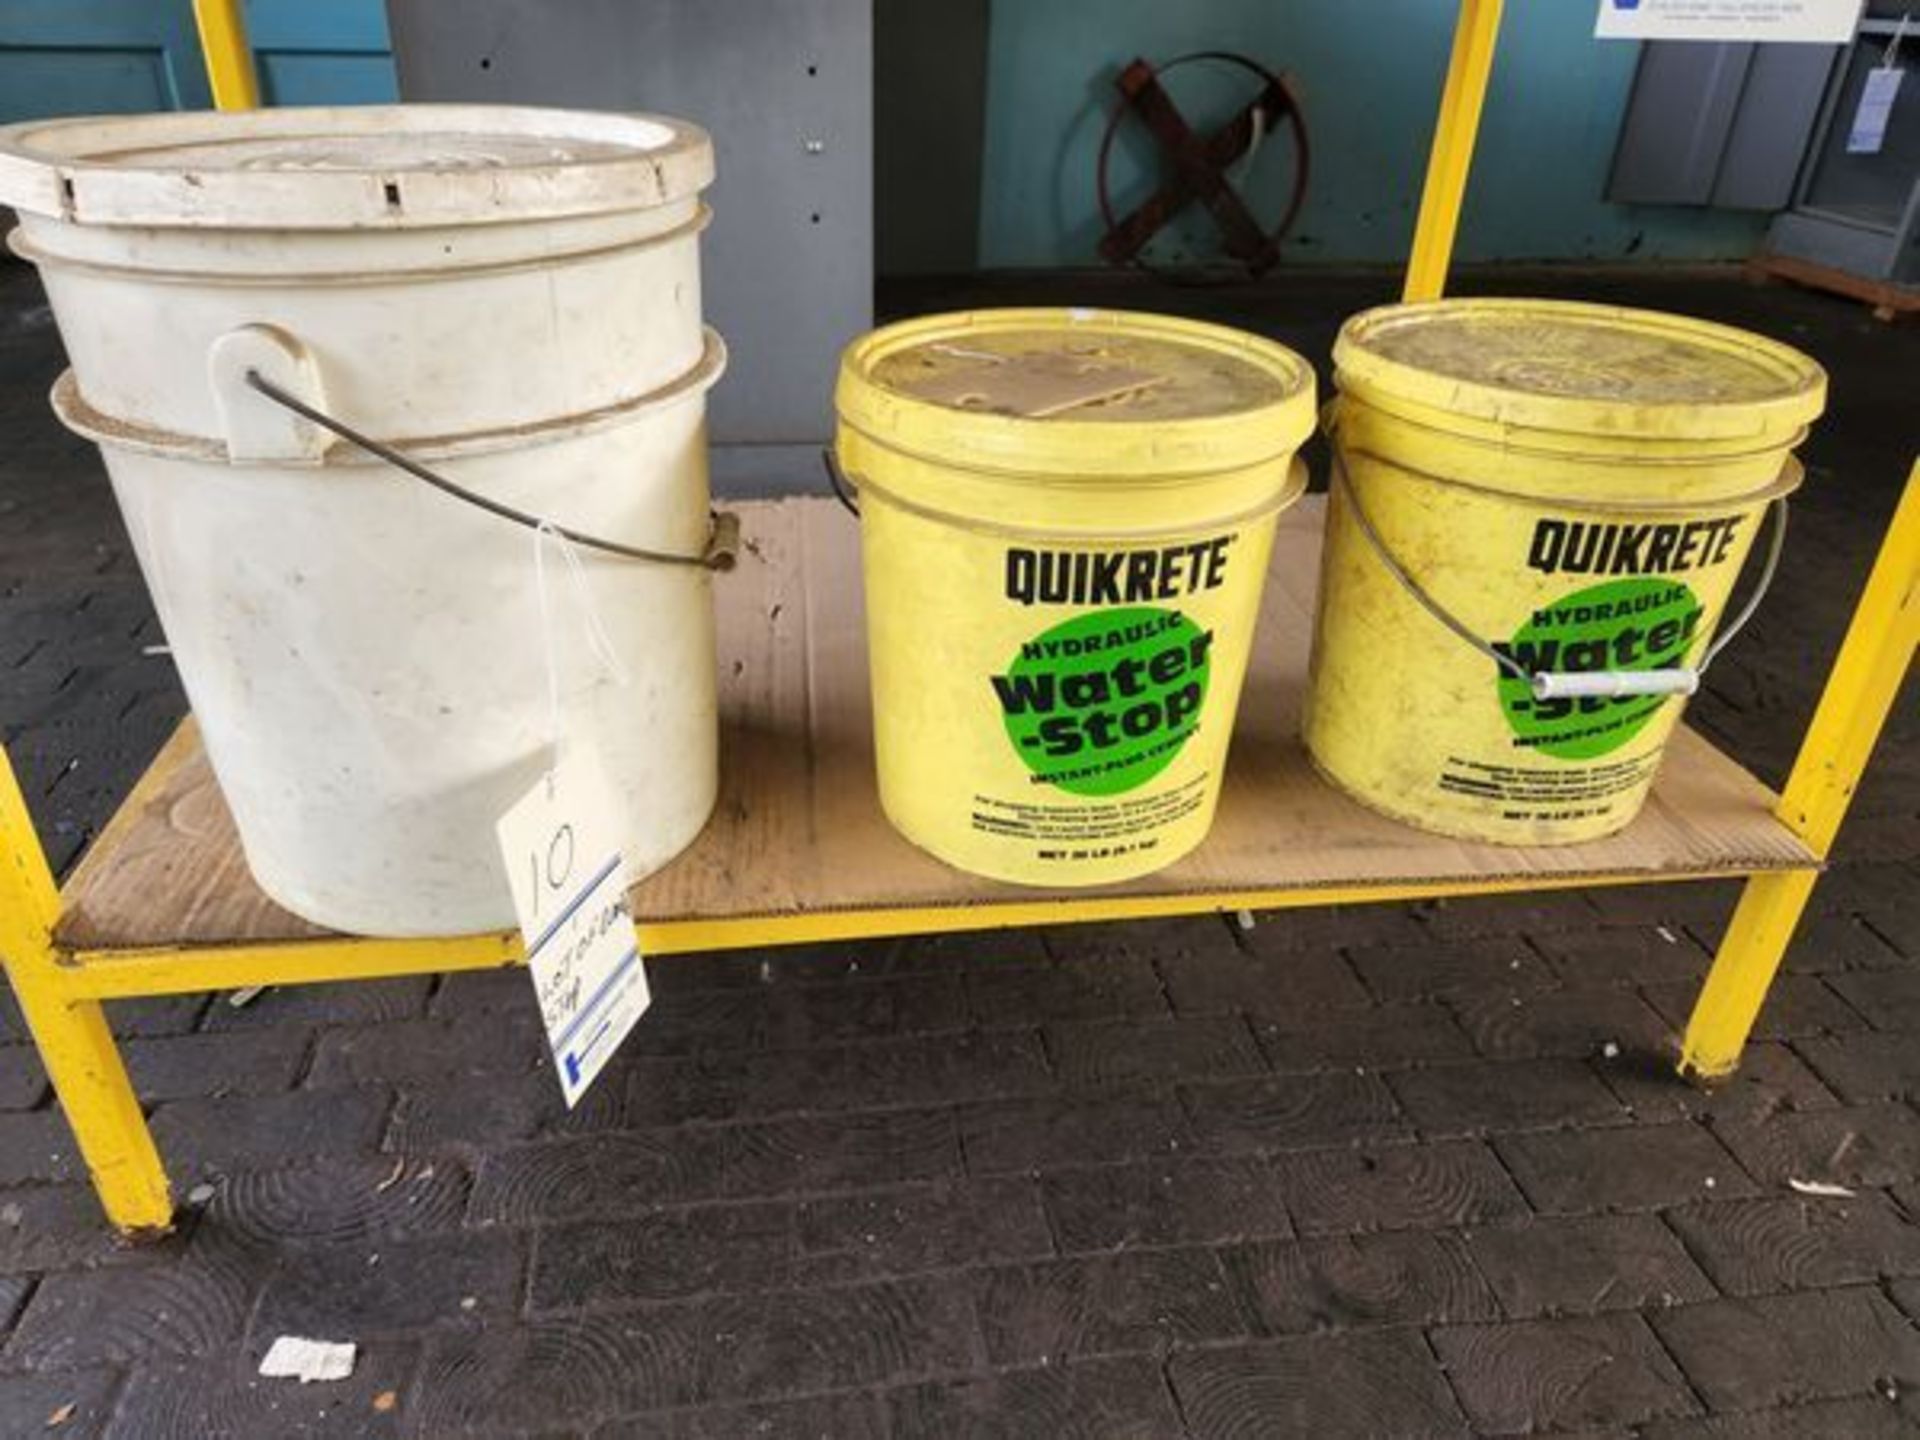 LOT OF QUIKRETE HYDRAULIC WATER-STOP